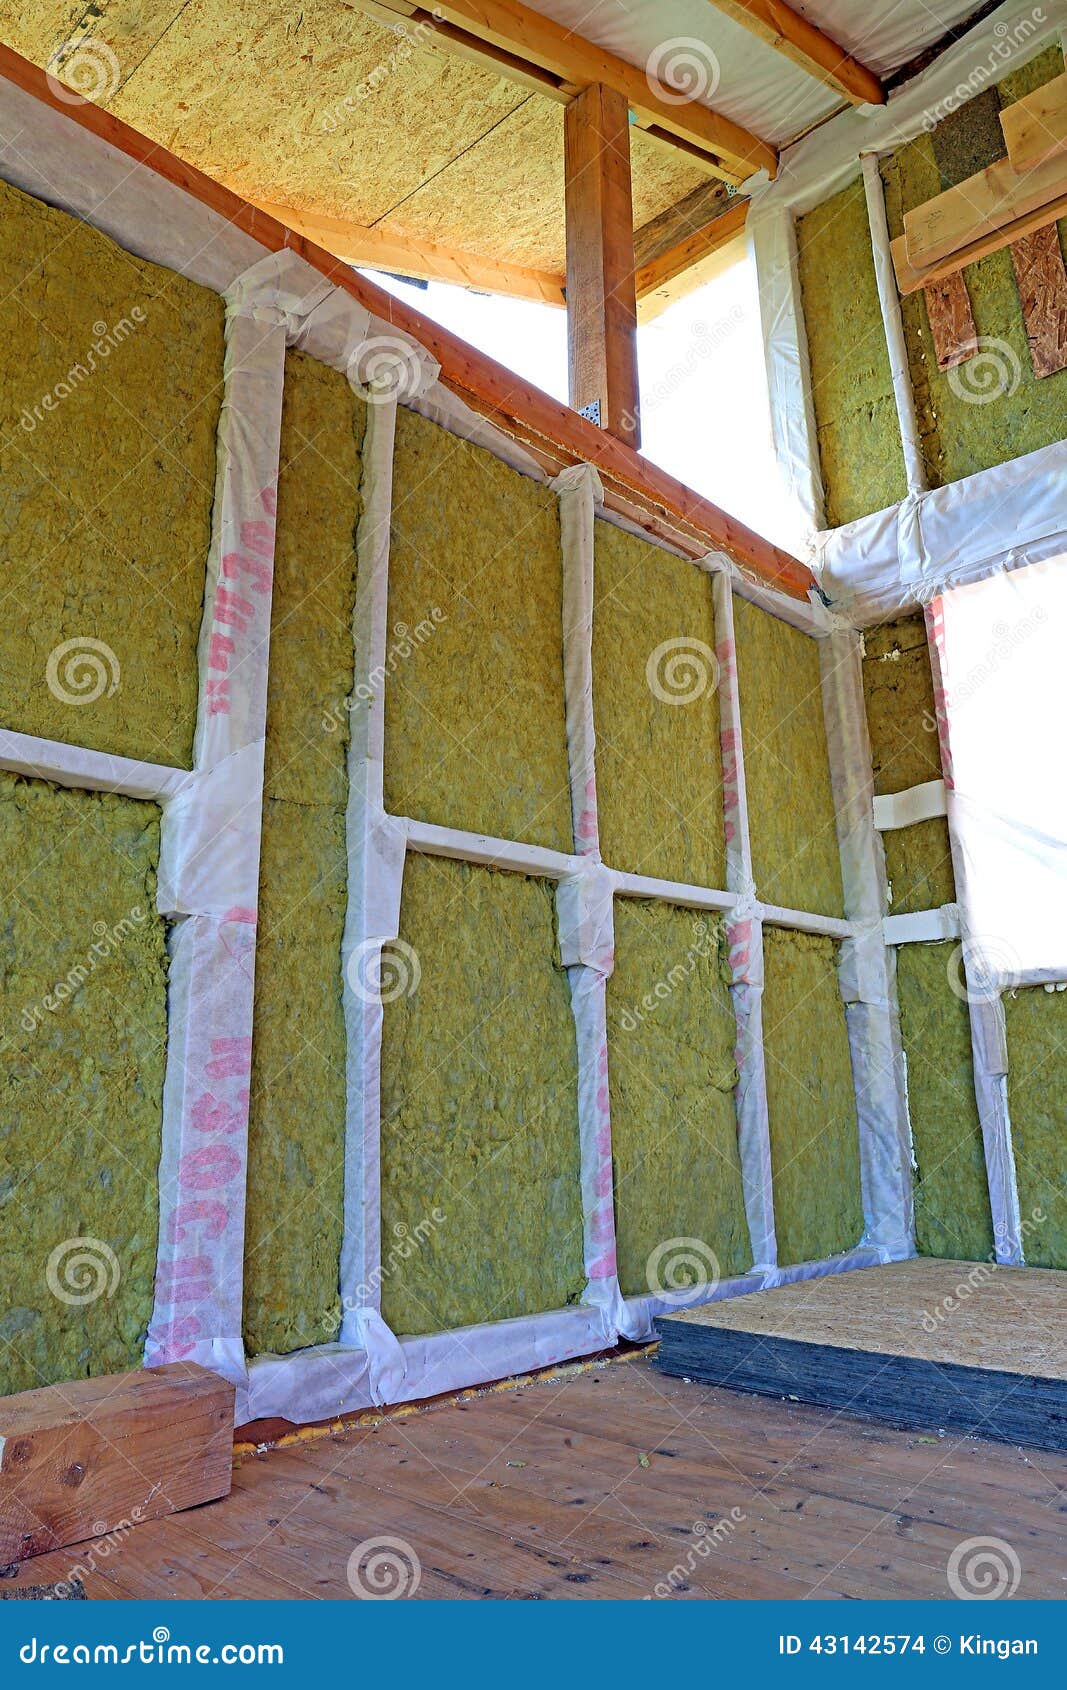 Walls Of A Frame House With Different Types Of Heat Insulation